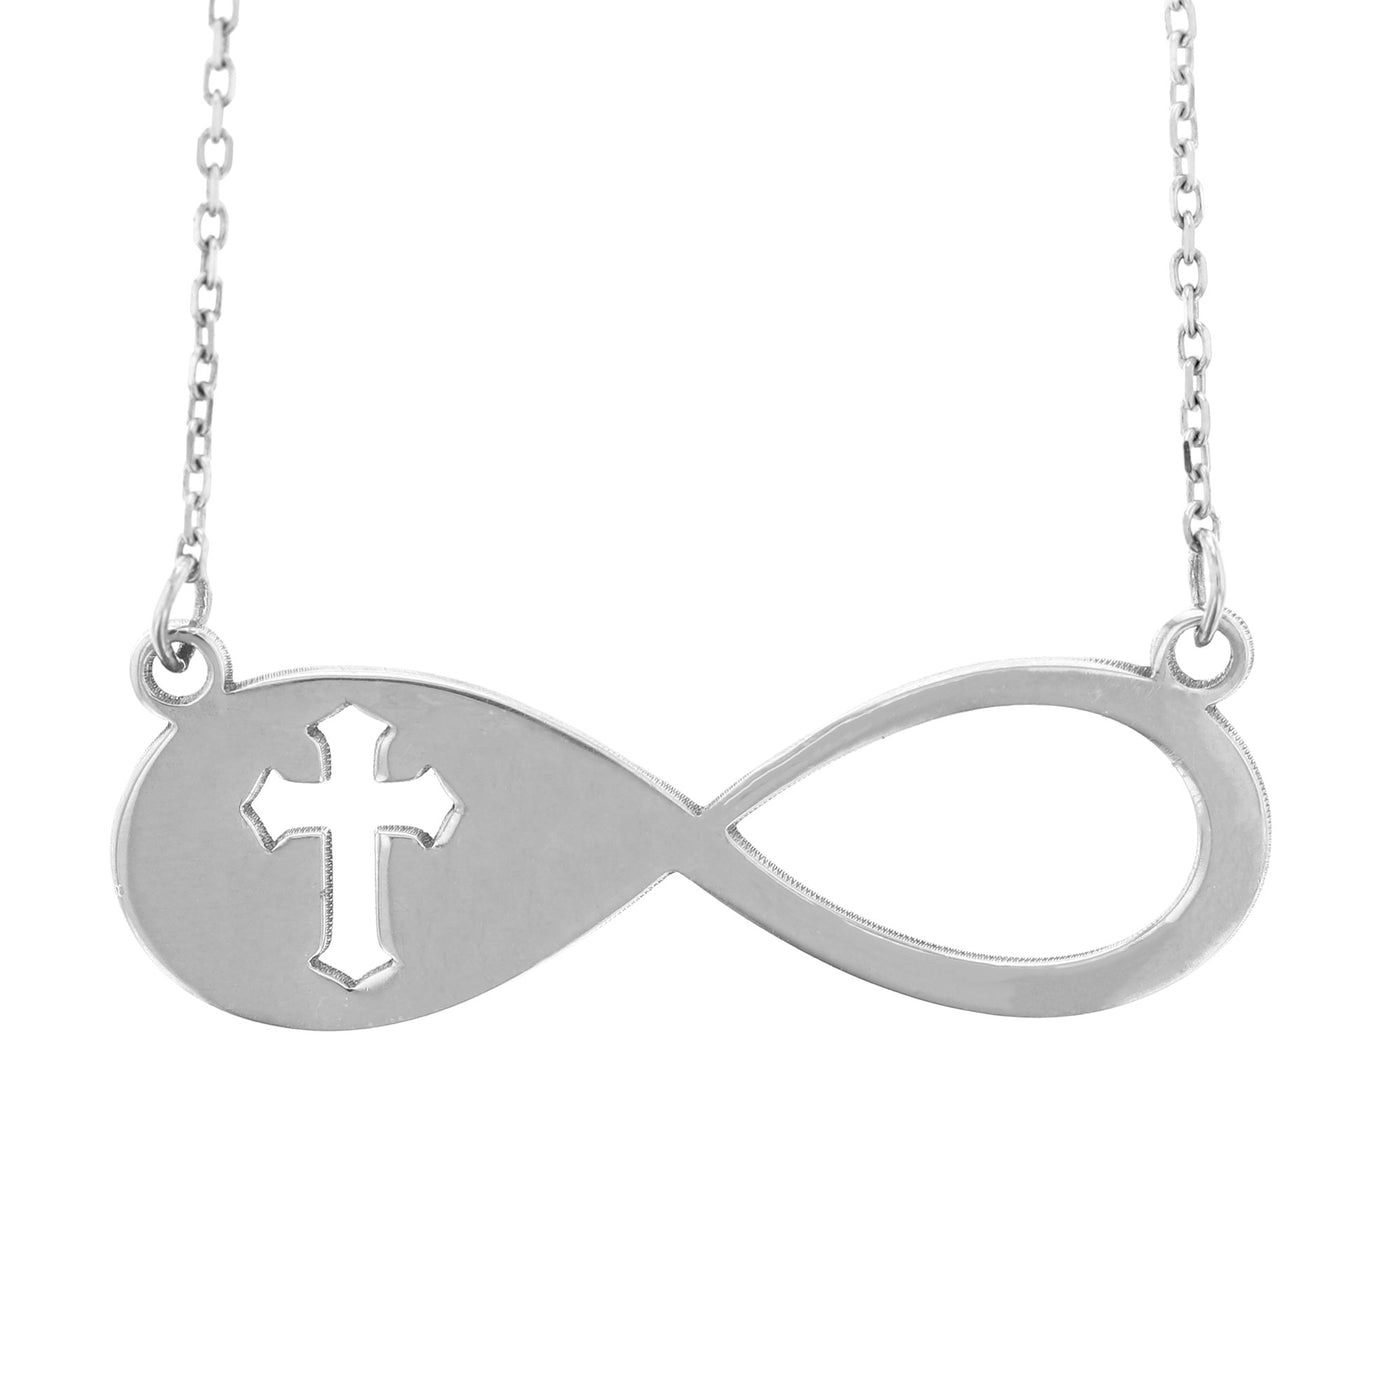 Rebecca Sloane Sterling Silver Infinity with Cut out Cross Necklace